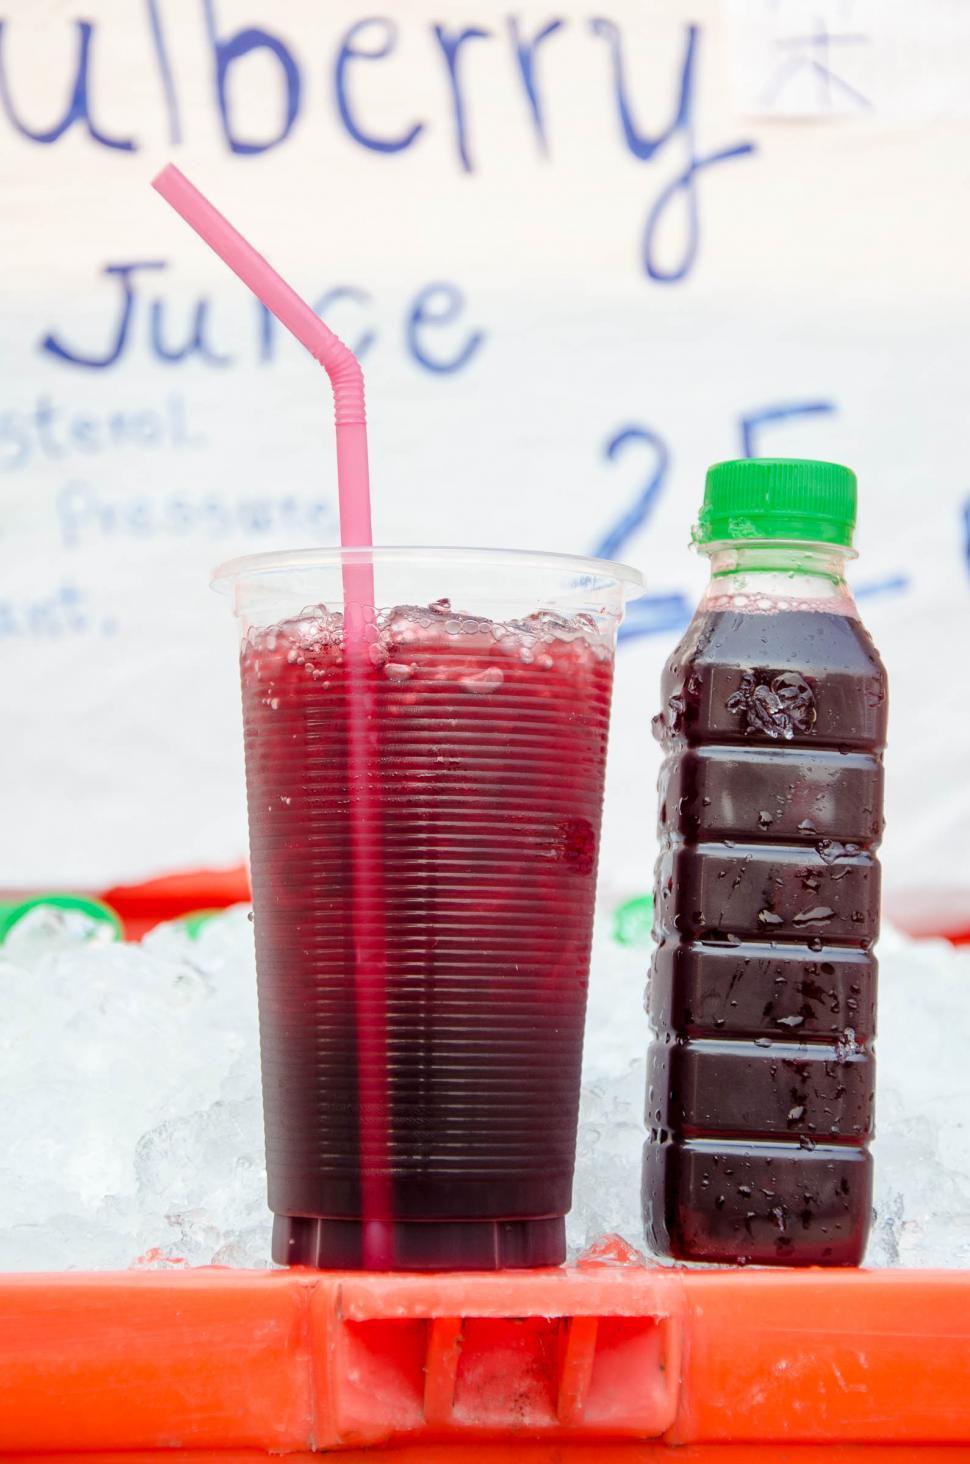 Free Image of Mulberry Juice 